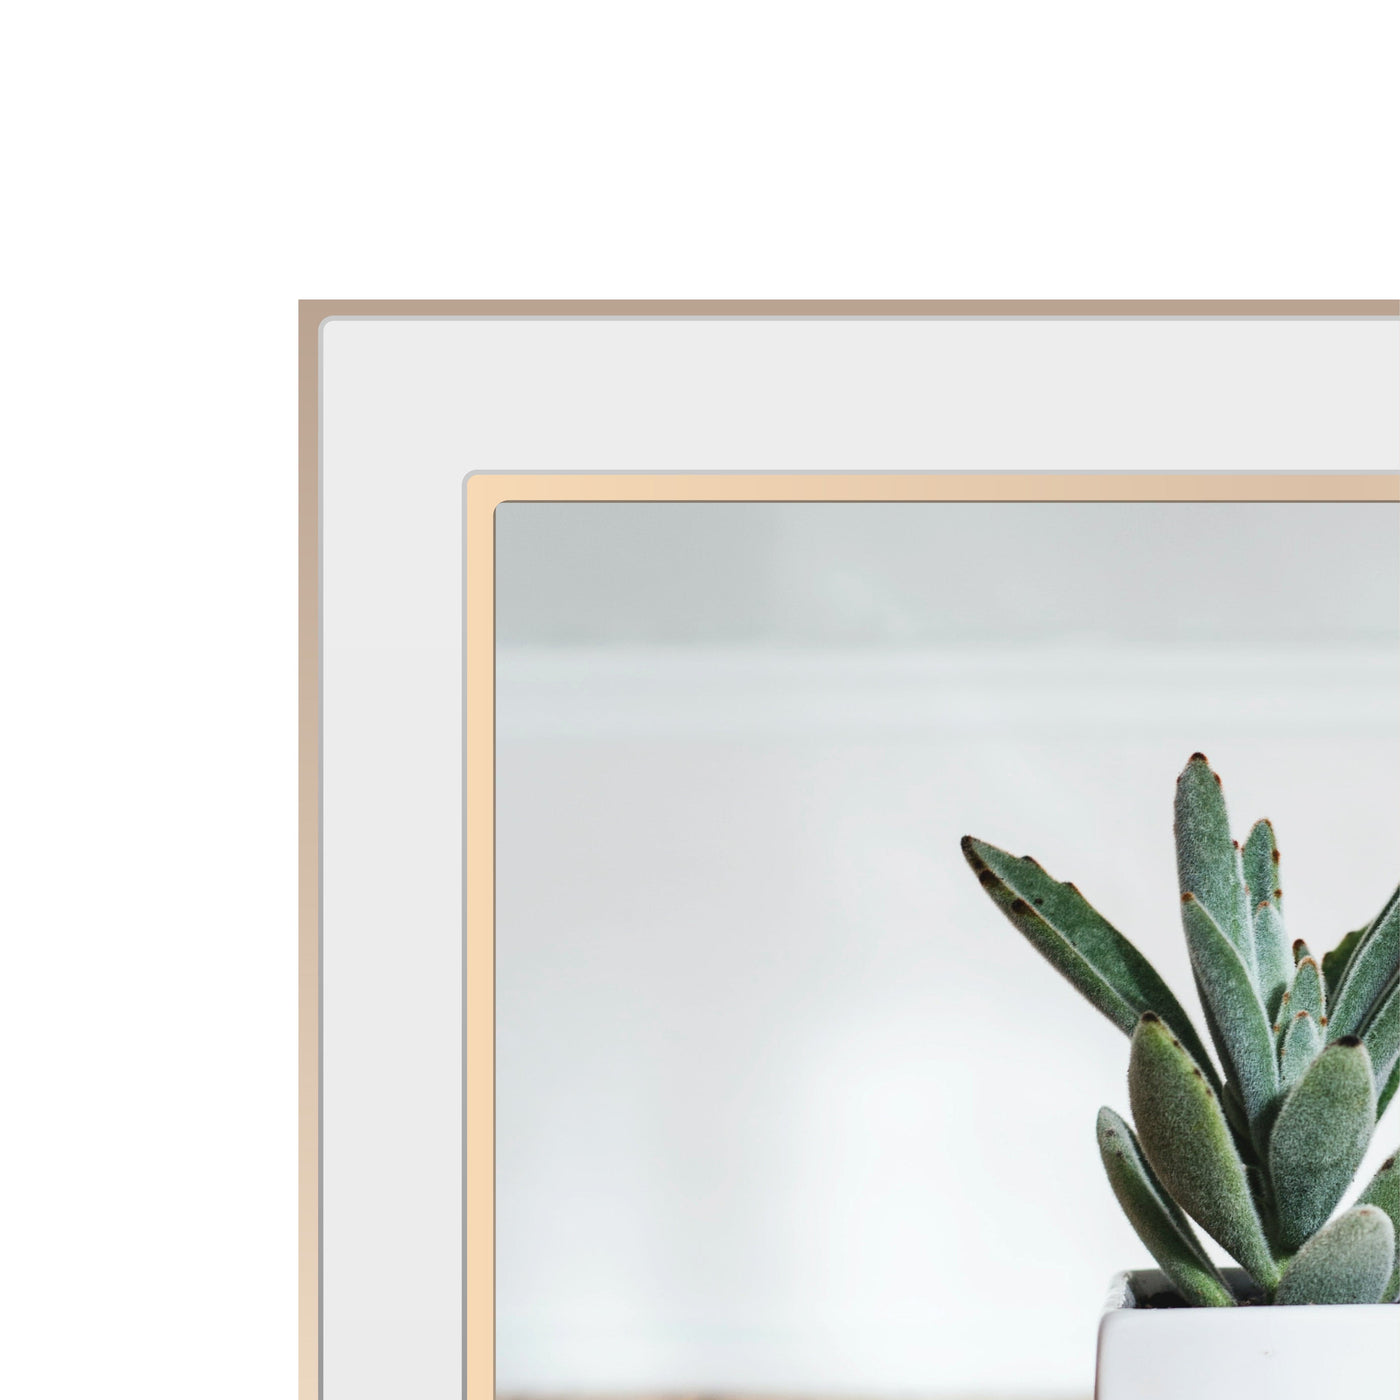 Eternal White/Rose Gold Metal Collage Three Photo Frame from our Metal Photo Frames collection by Profile Products Australia